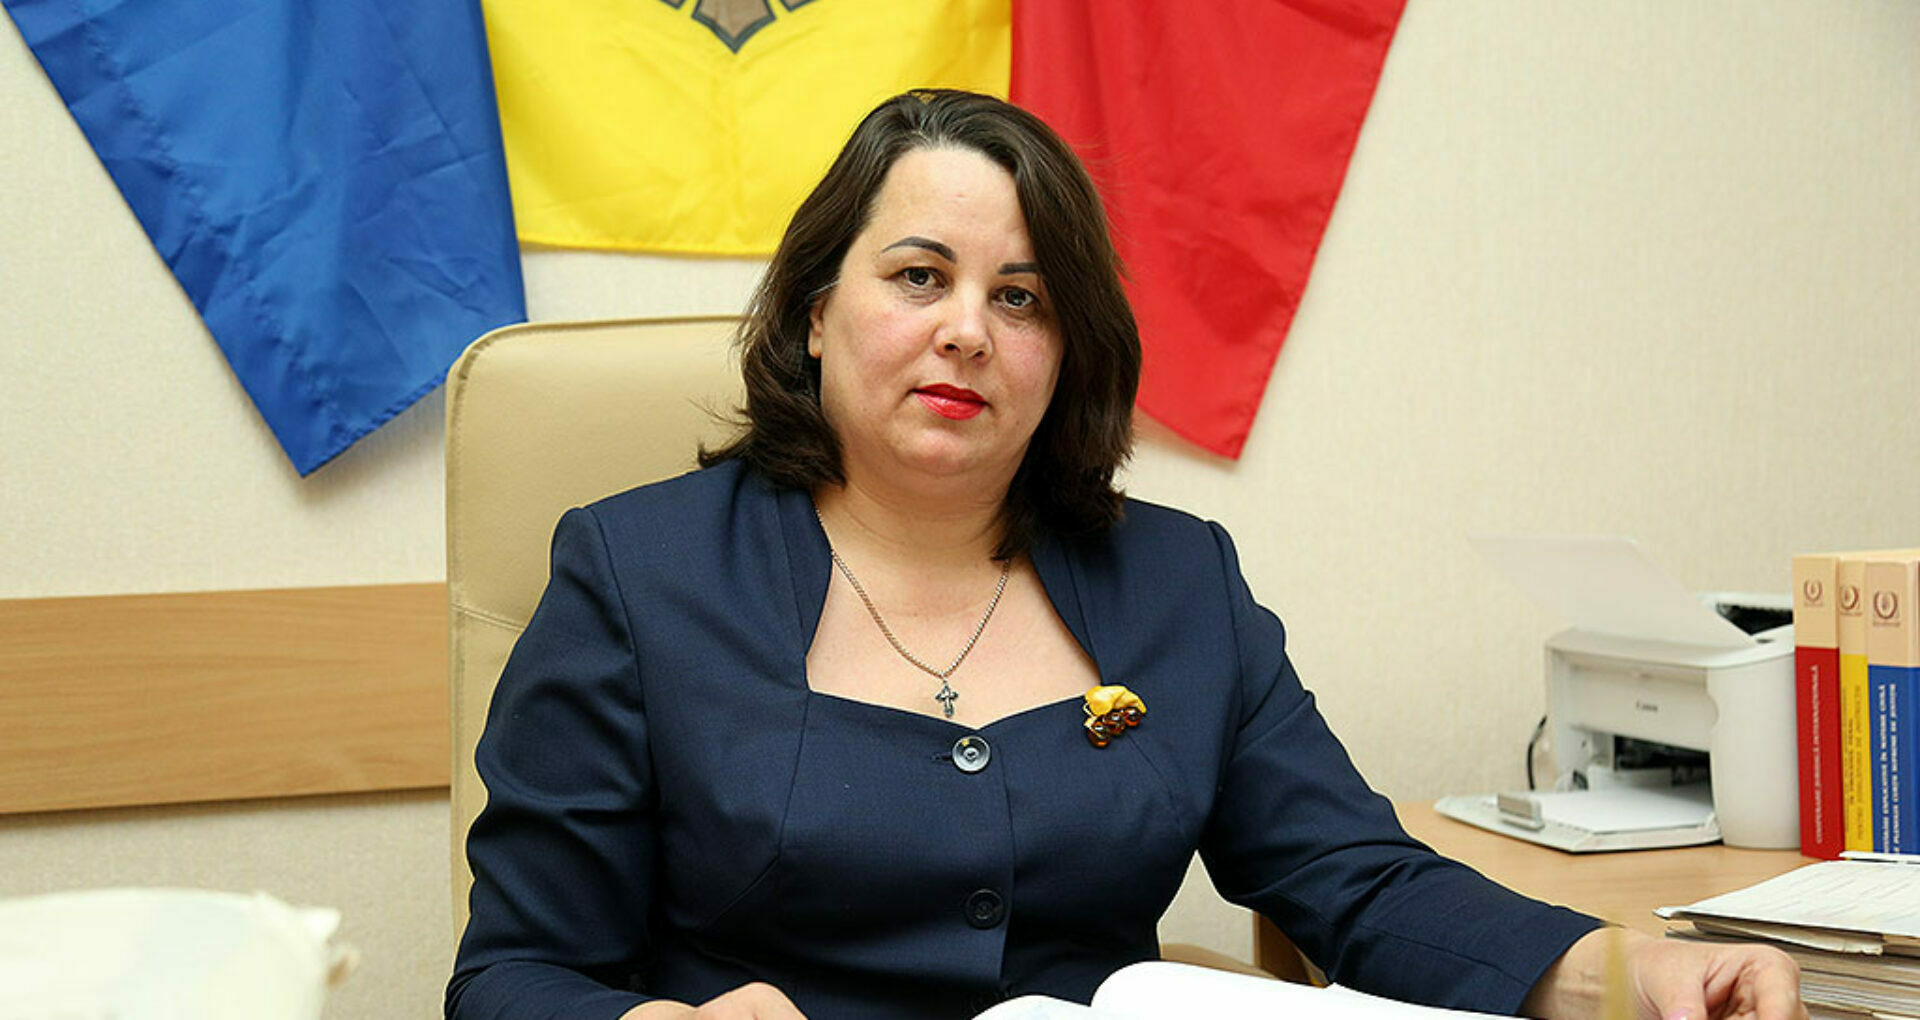 Viorica Puică May No Longer Be Appointed to the Supreme Court of Justice